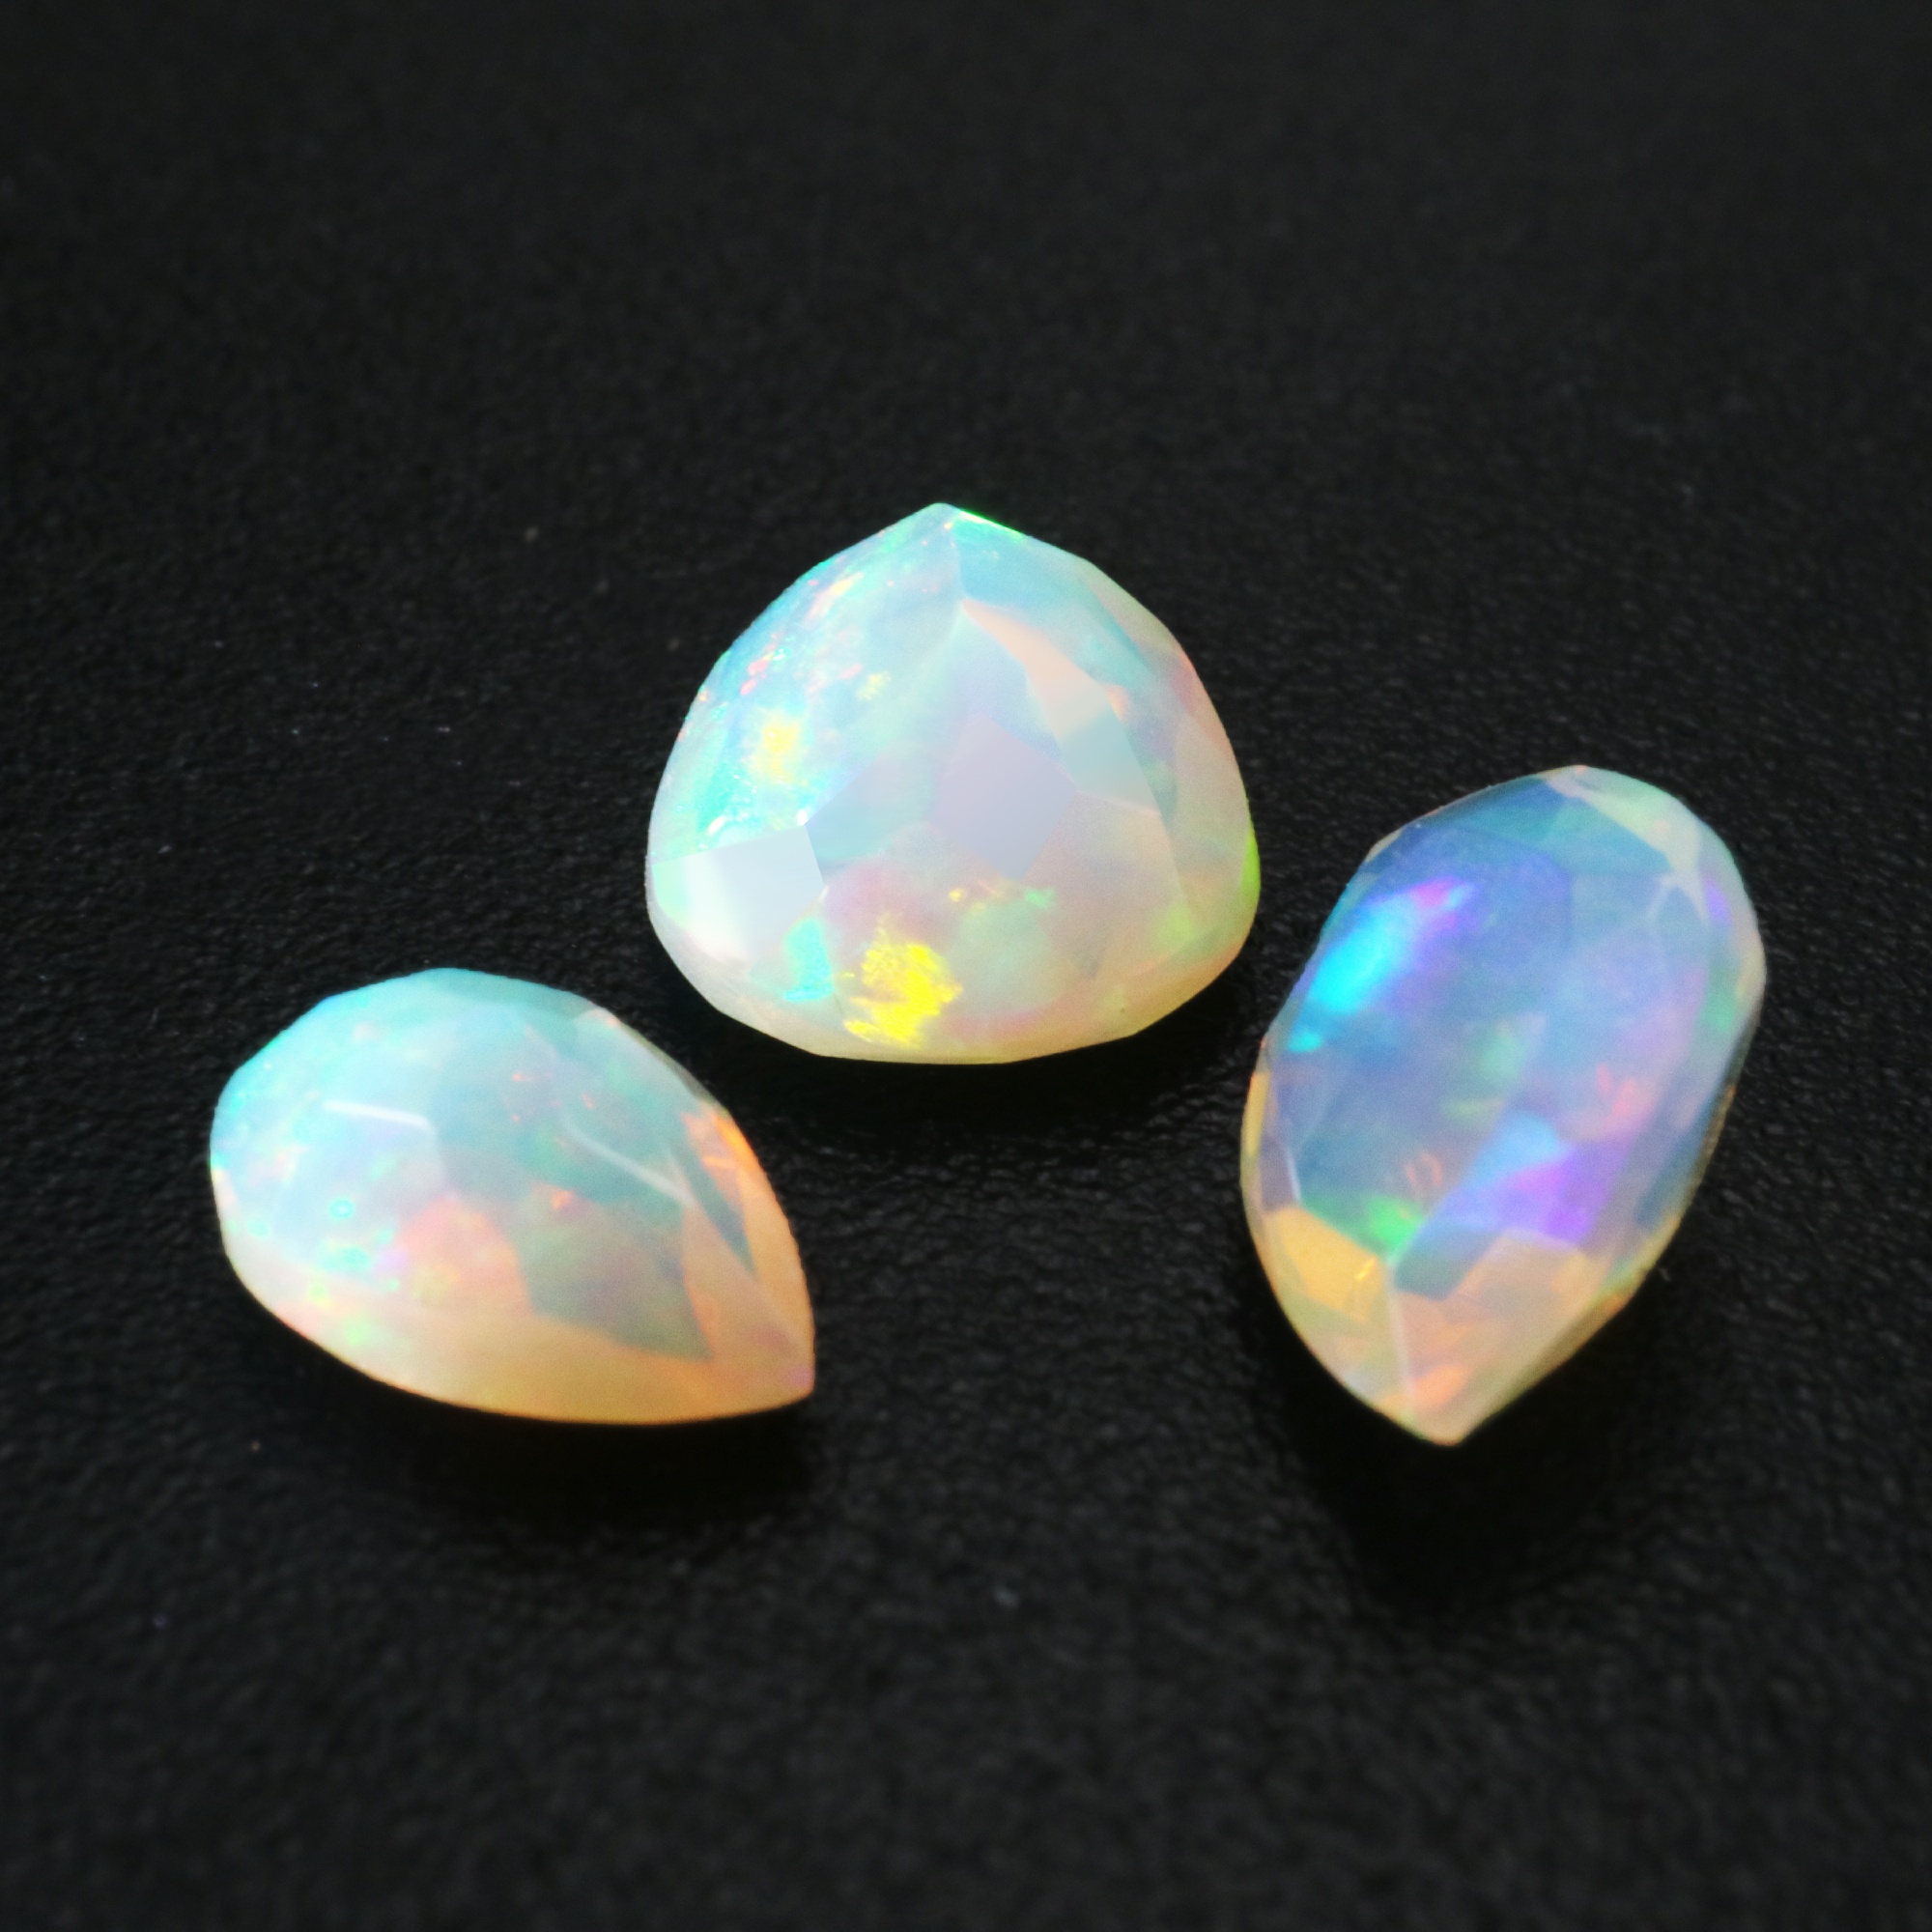 1Pcs Pear Drop Africa Opal October Birthstone Color Changing Faceted Cut AAA Grade Loose Gemstone Natural Semi Precious Stone DIY Jewelry Supplies 4150016 - Click Image to Close